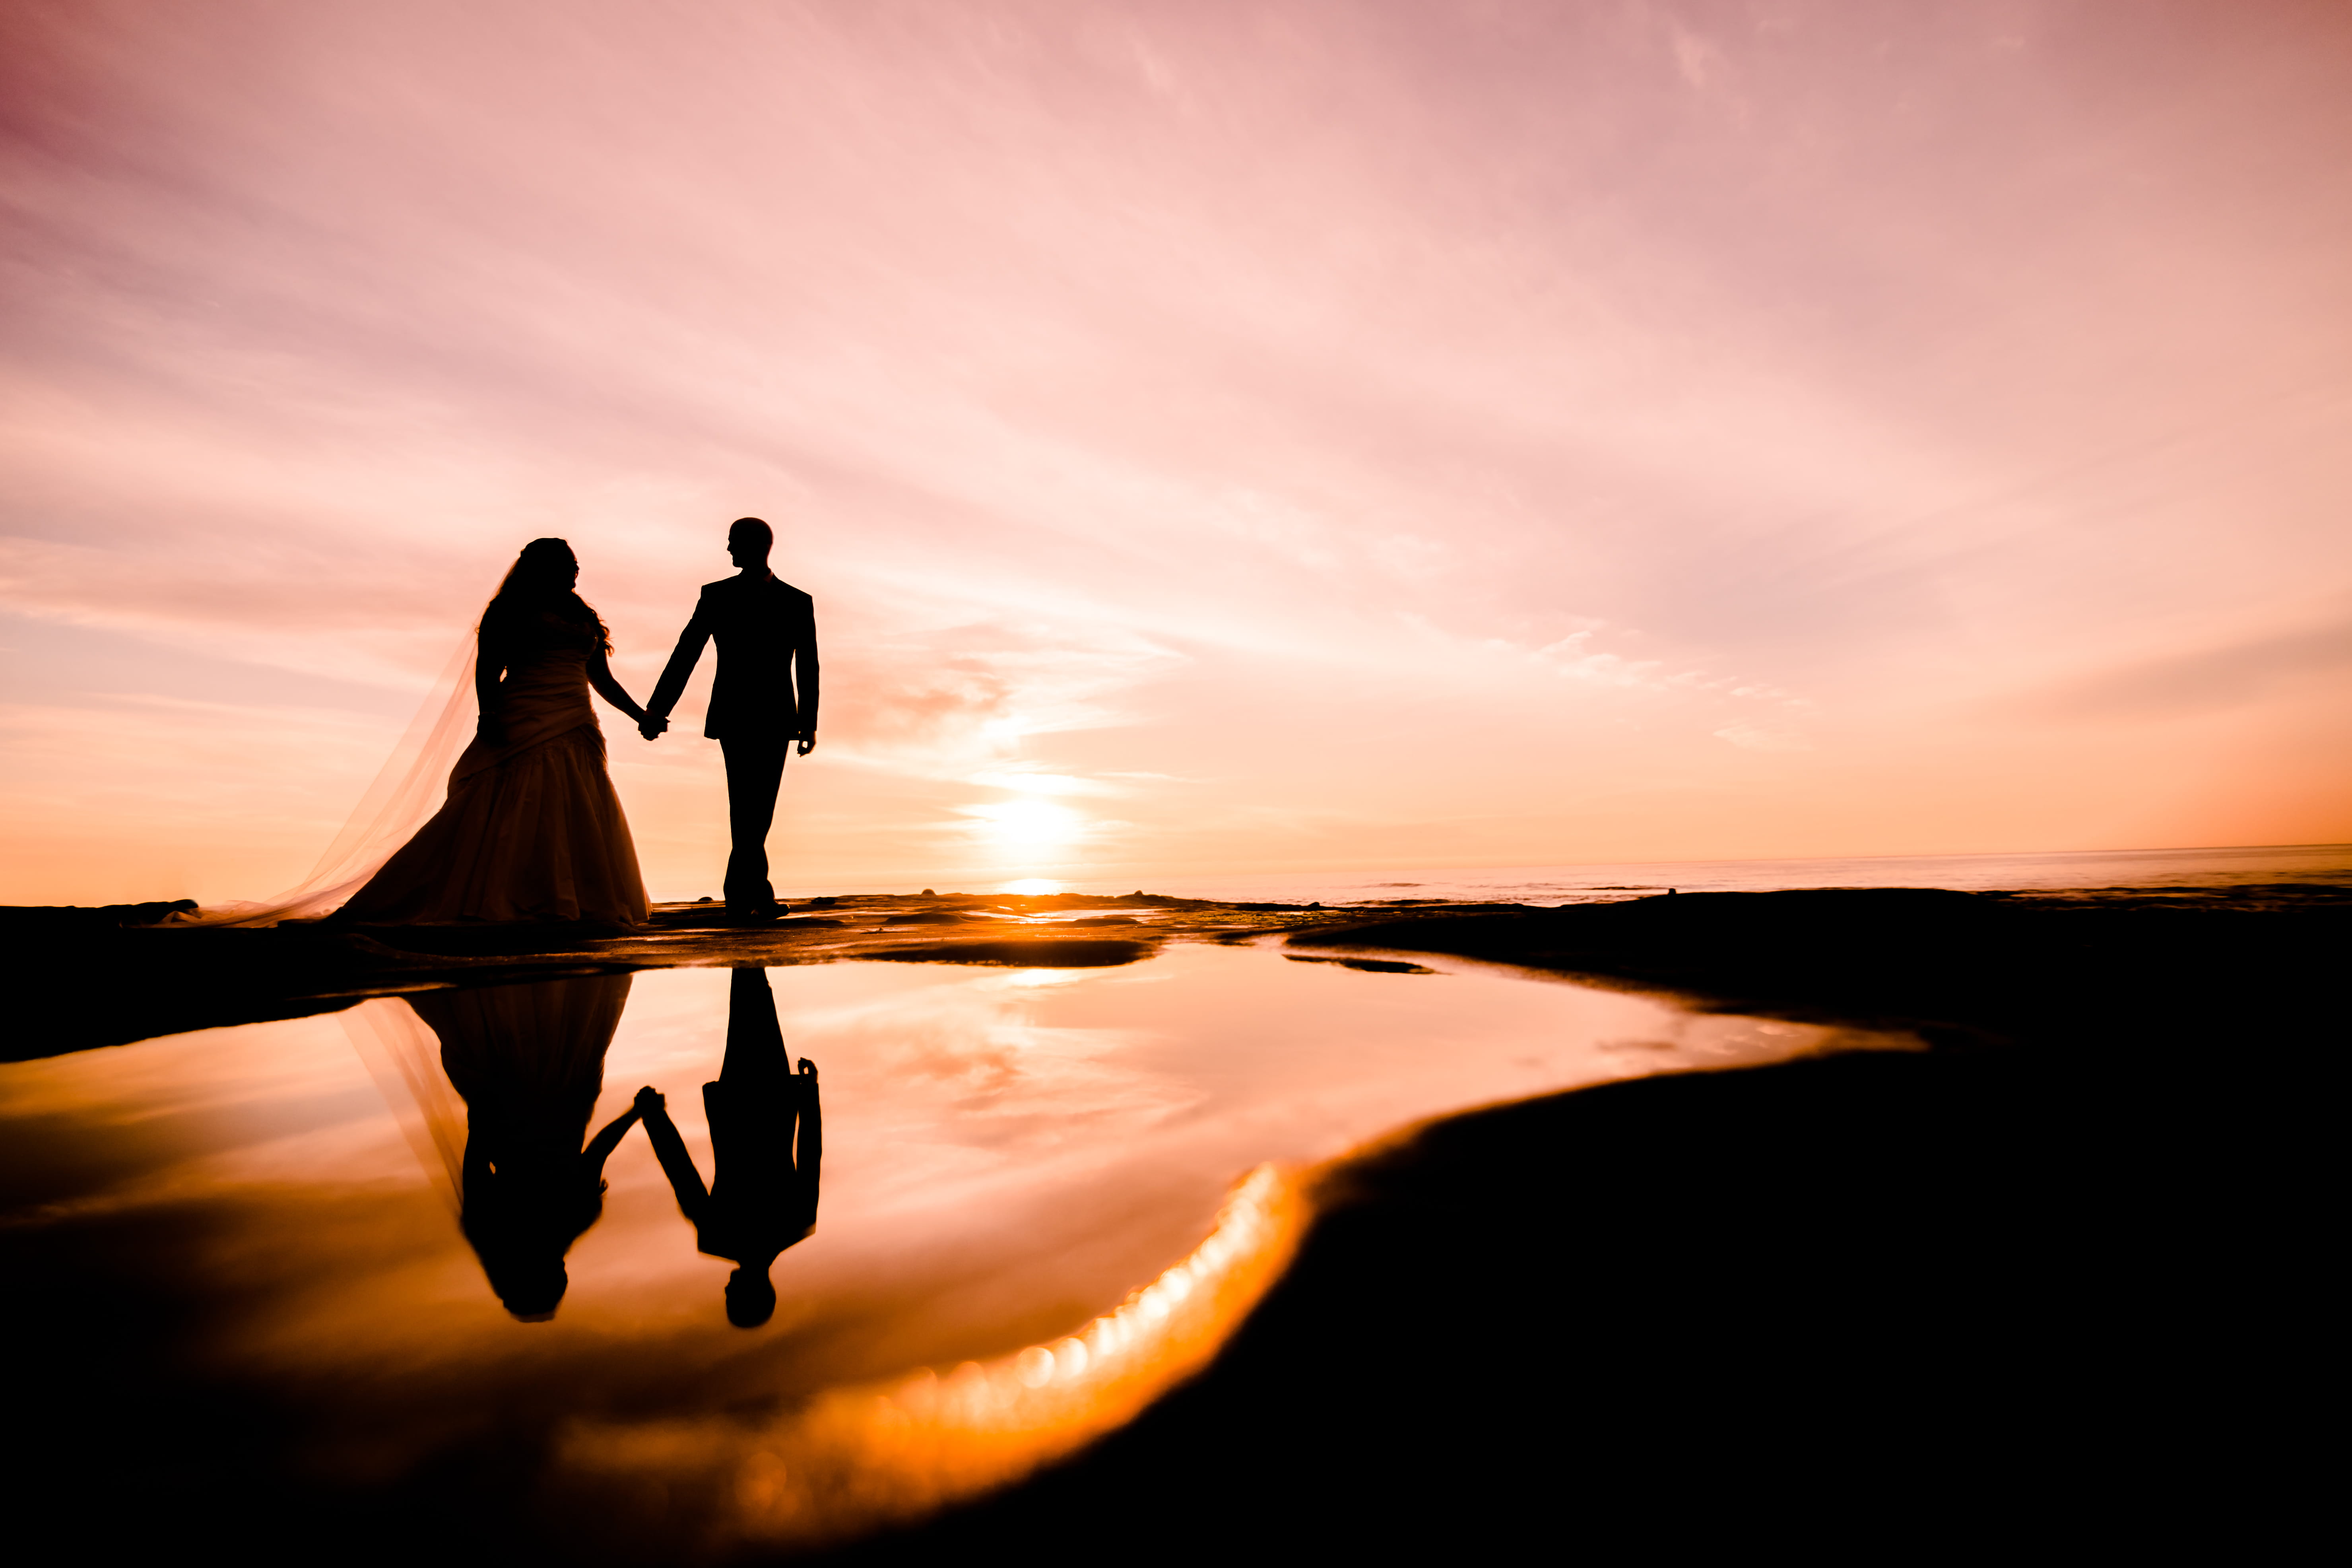 silhouette photography of couple walking near body of water, wedding